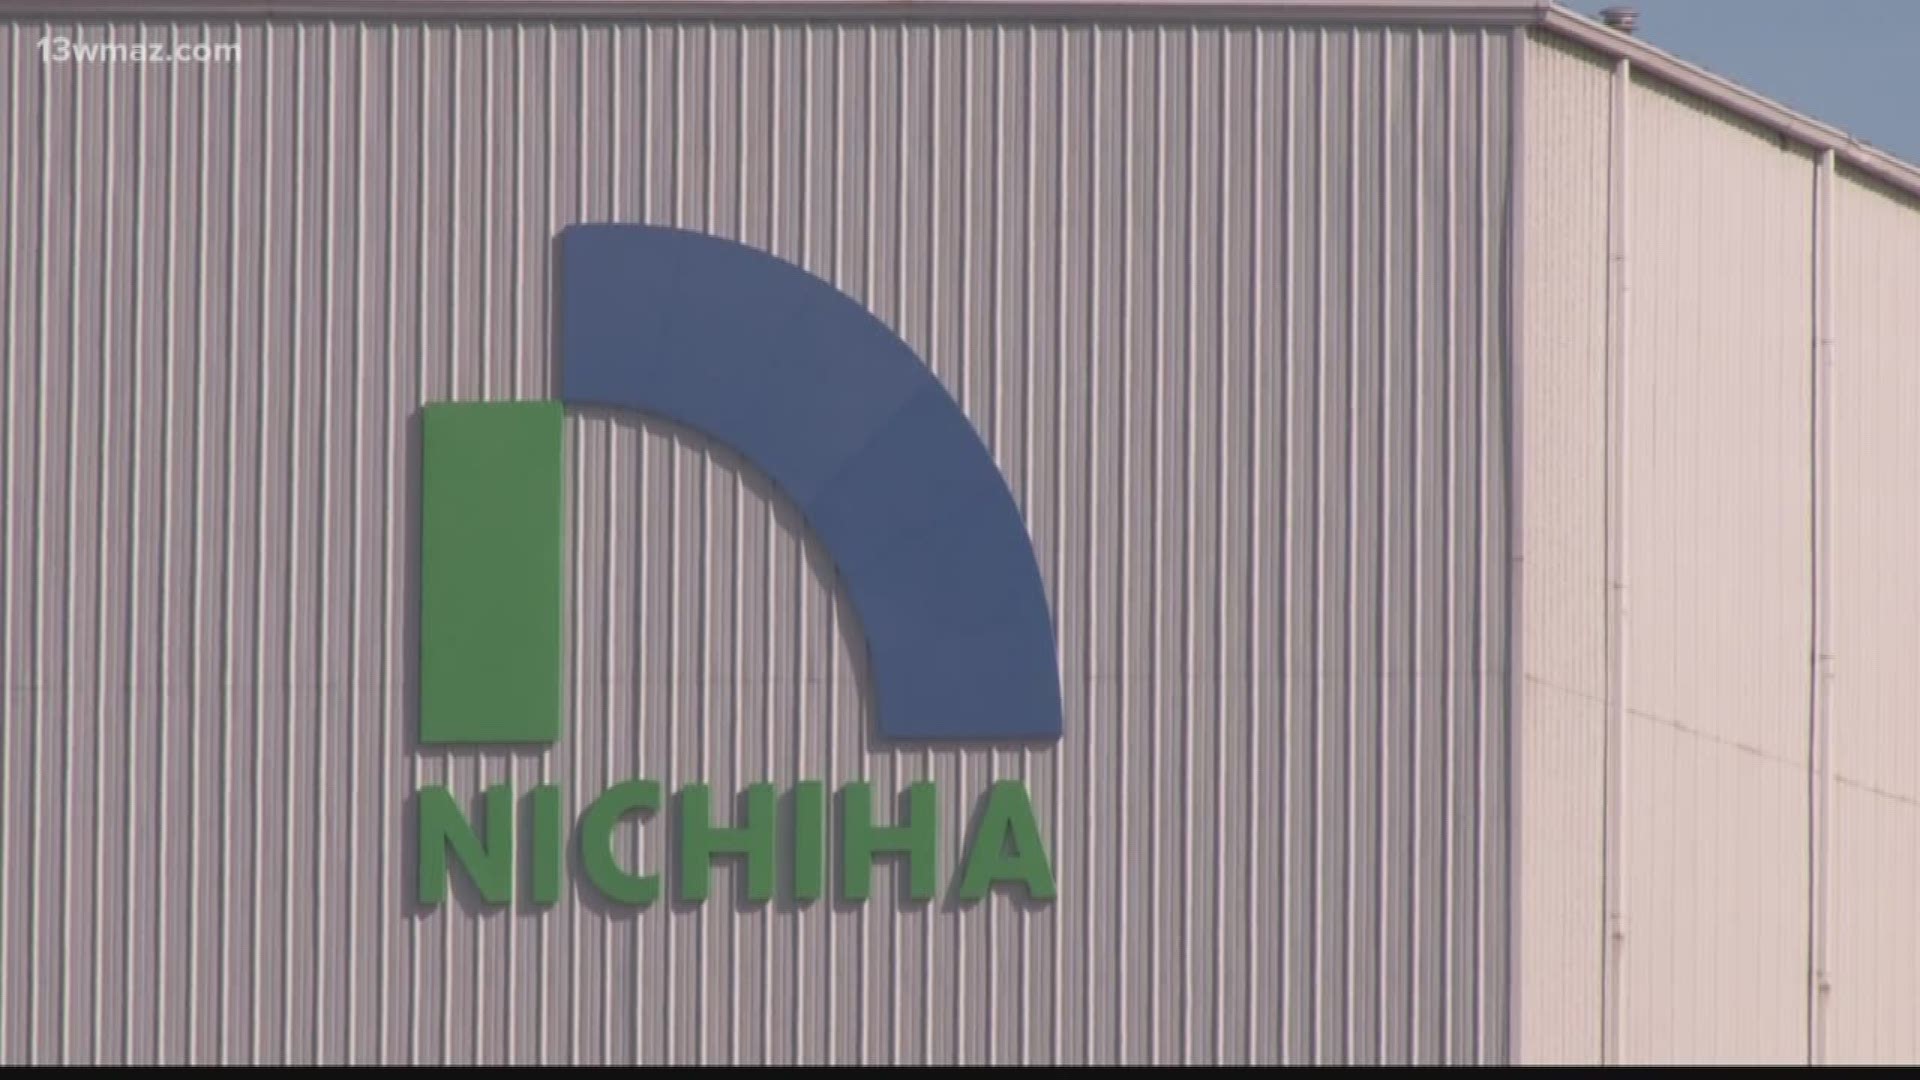 The Occupational Safety and Health Administration continues to put the south Bibb Nichiha factory under the microscope after a second fatal accident.